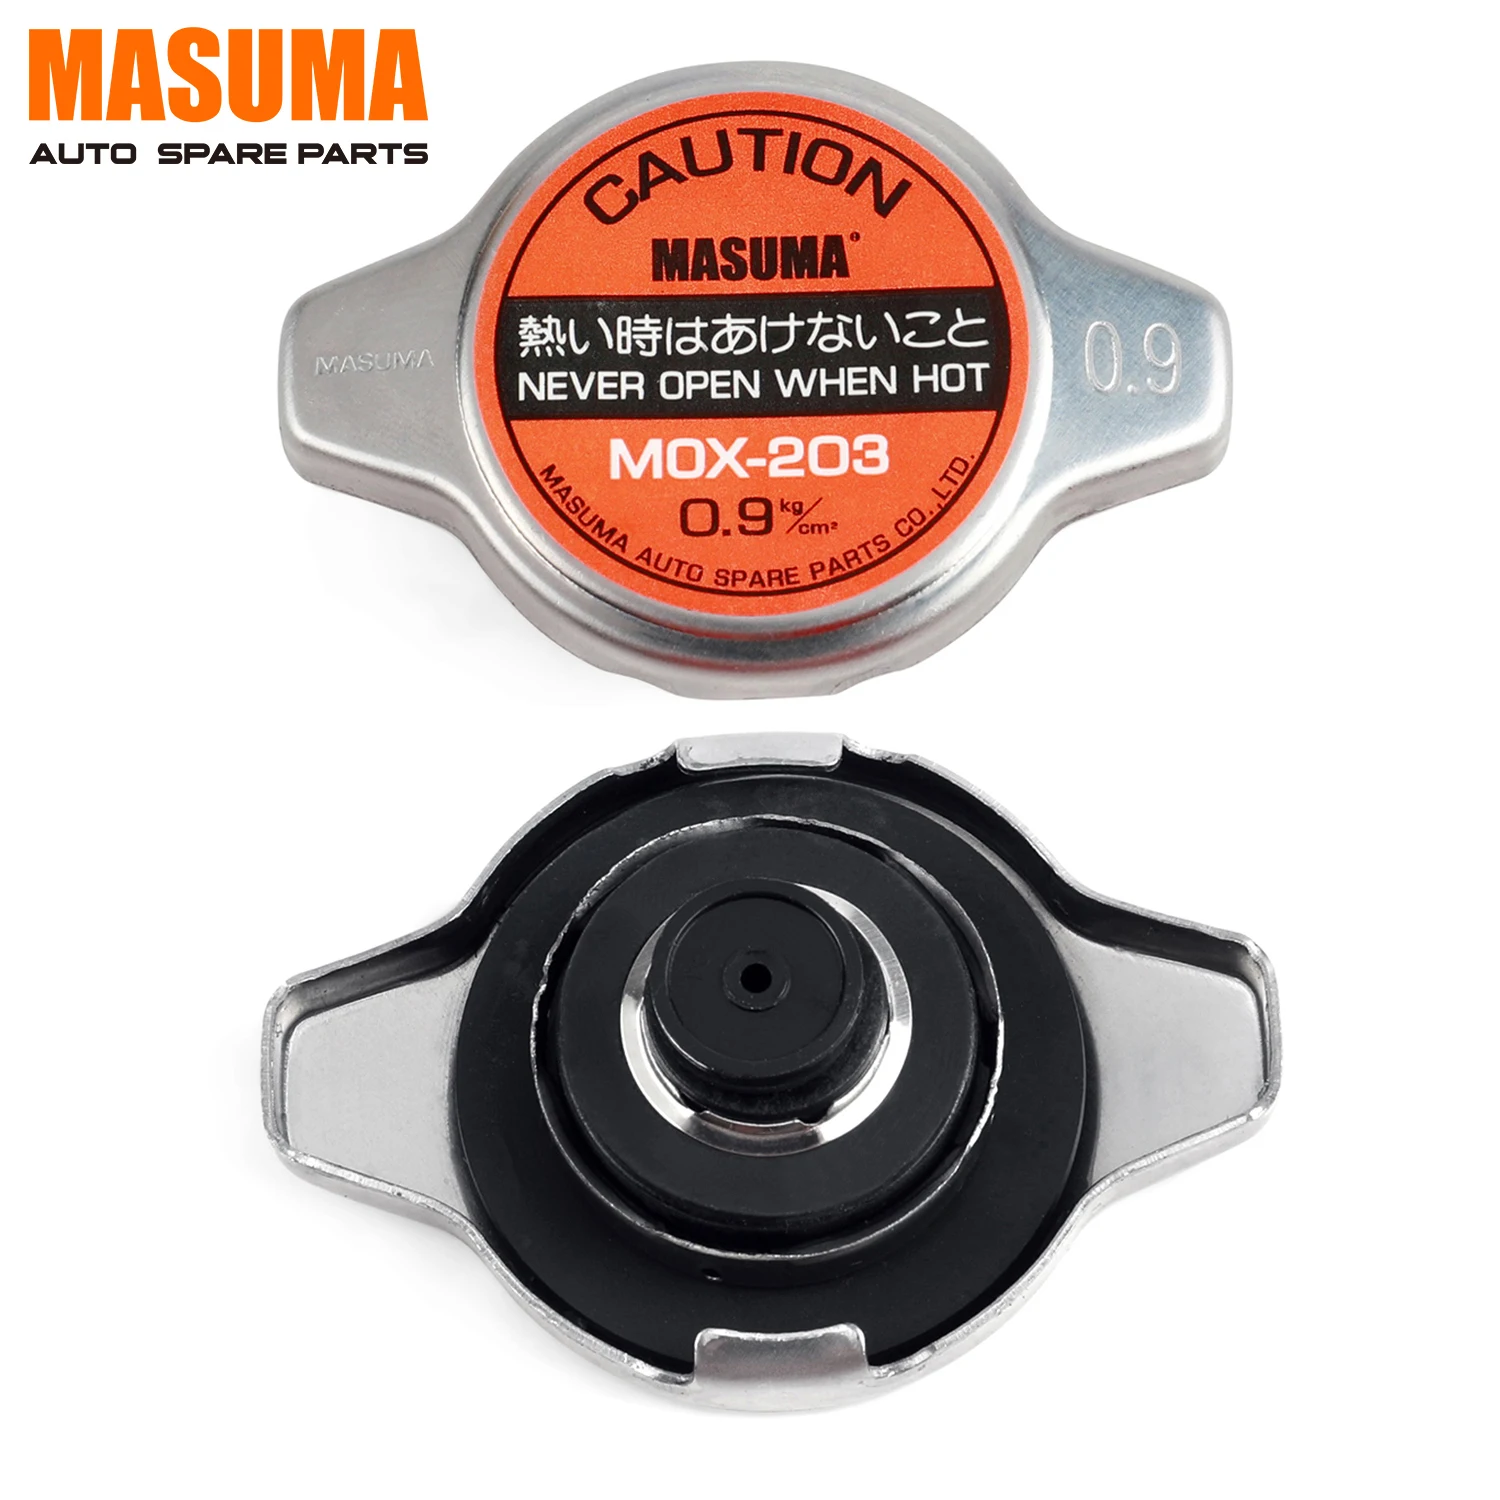 Wholesale MOX-203 MASUMA Vehicles Auto Parts Accessories Cooling System  Radiator cap cover 17320-56B00 16401-87208 for TOYOTA CROWN From 